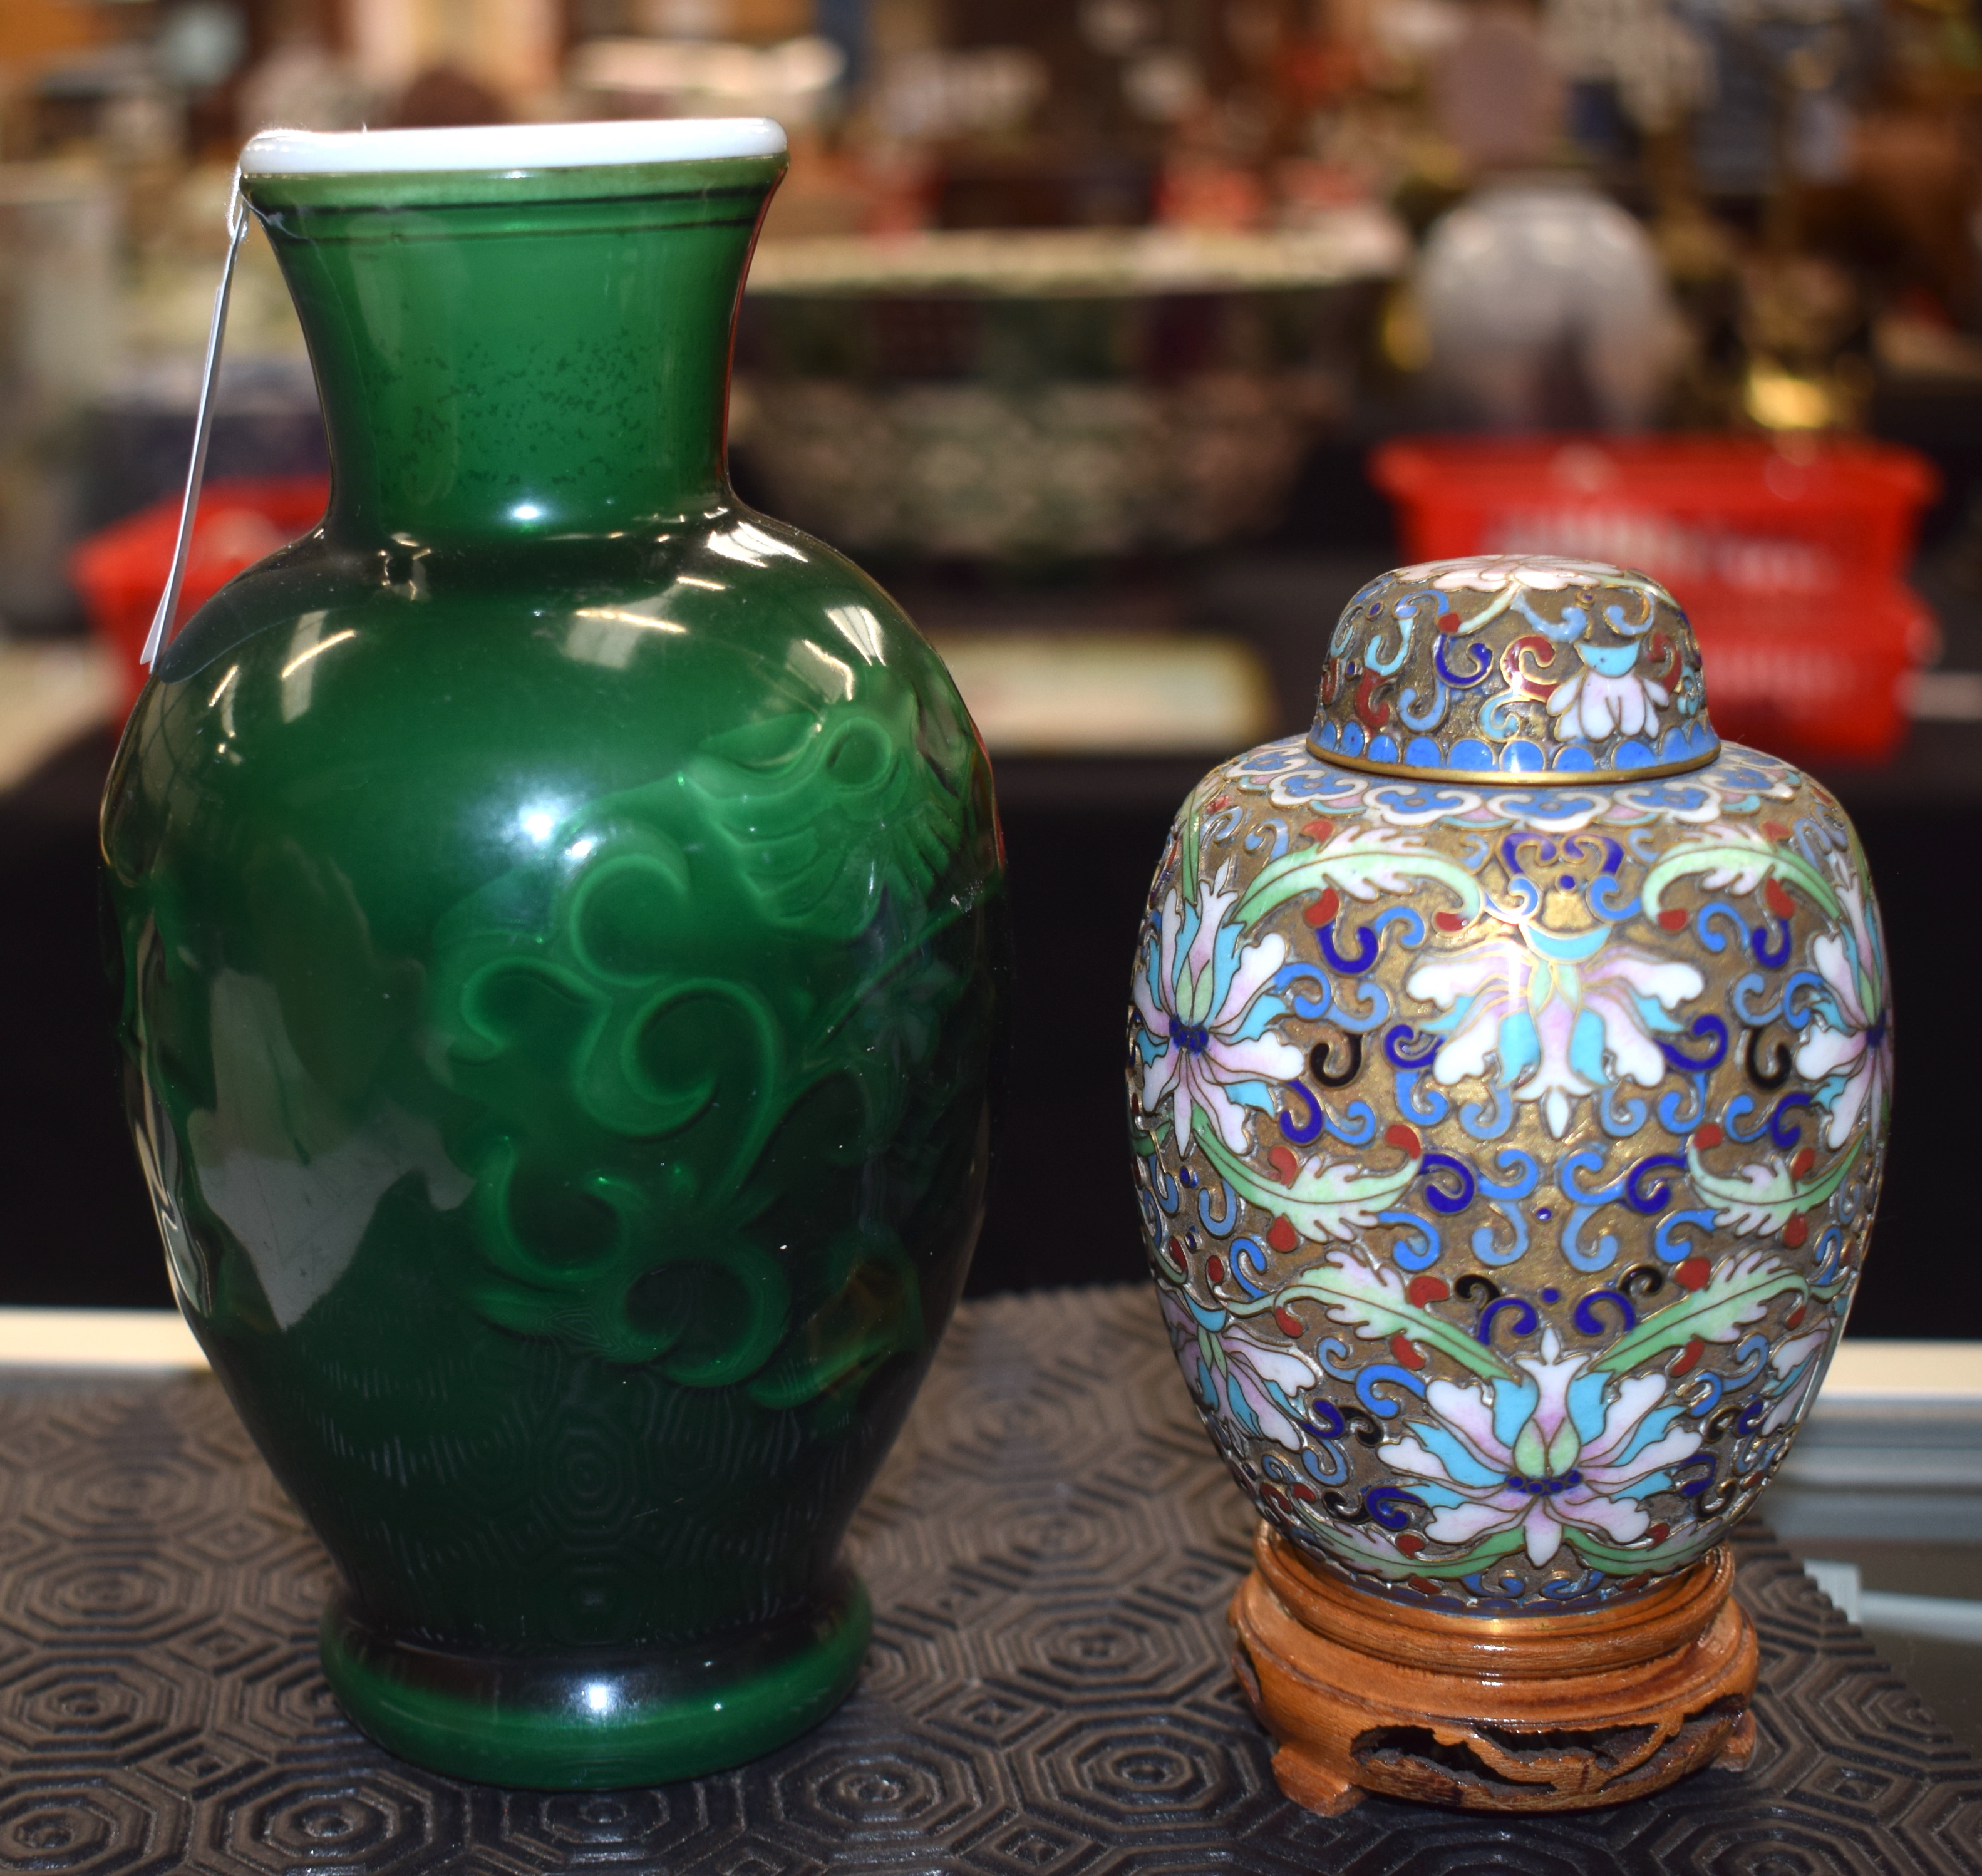 AN EARLY 20TH CENTURY CHINESE CLOISONNE ENAMEL VASE AND COVER together with a Peking style vase. La - Image 6 of 10